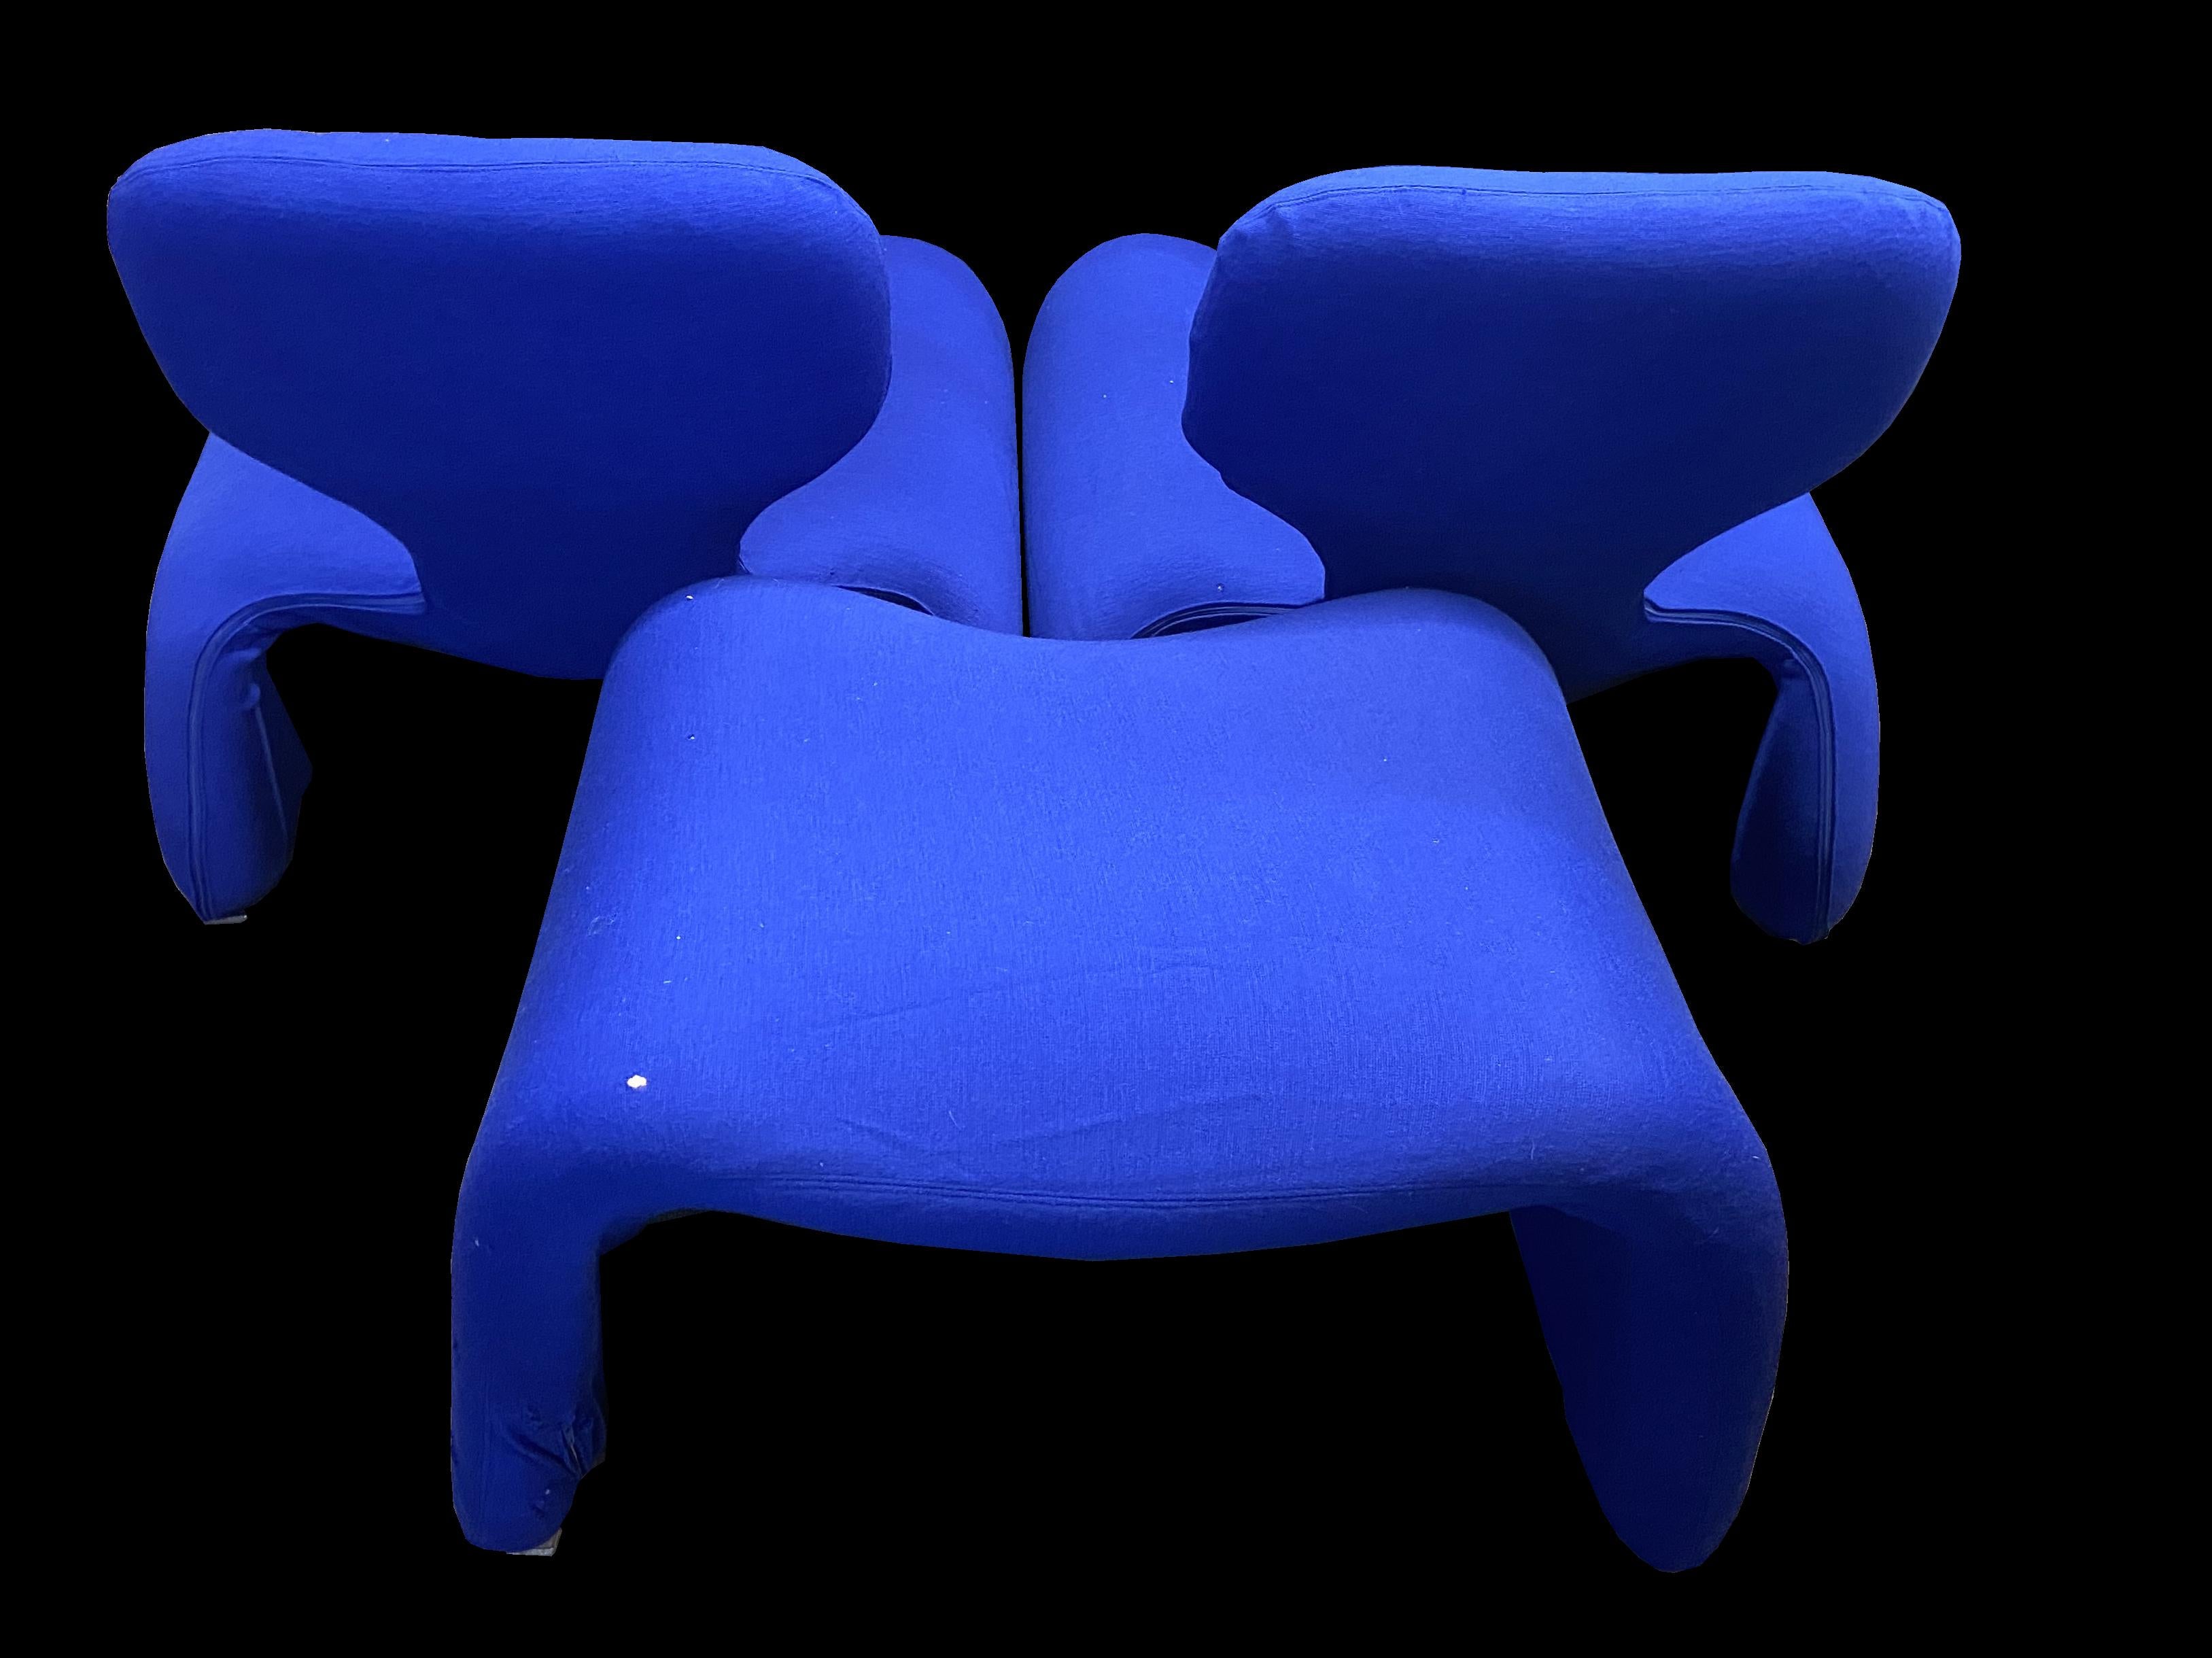 Mid-Century Modern Pair of Djinn Chairs and Single Footstool by Olivier Mourguw for Airborne